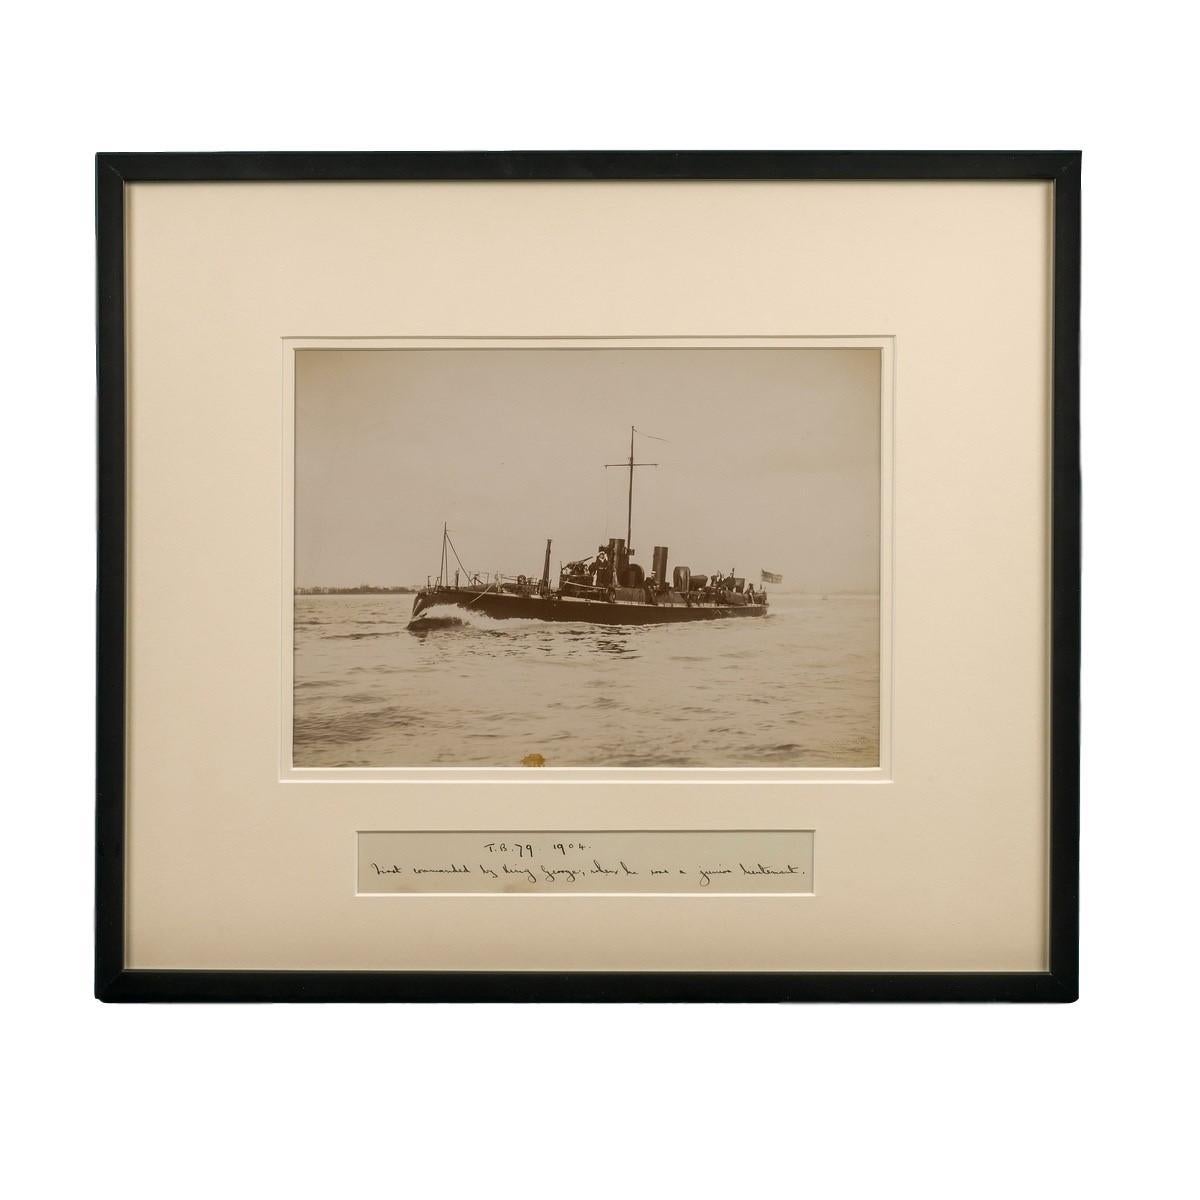 Framed Albumen Photograph of the Royal Navy Torpedo Boat No 79 In Good Condition For Sale In Lymington, Hampshire